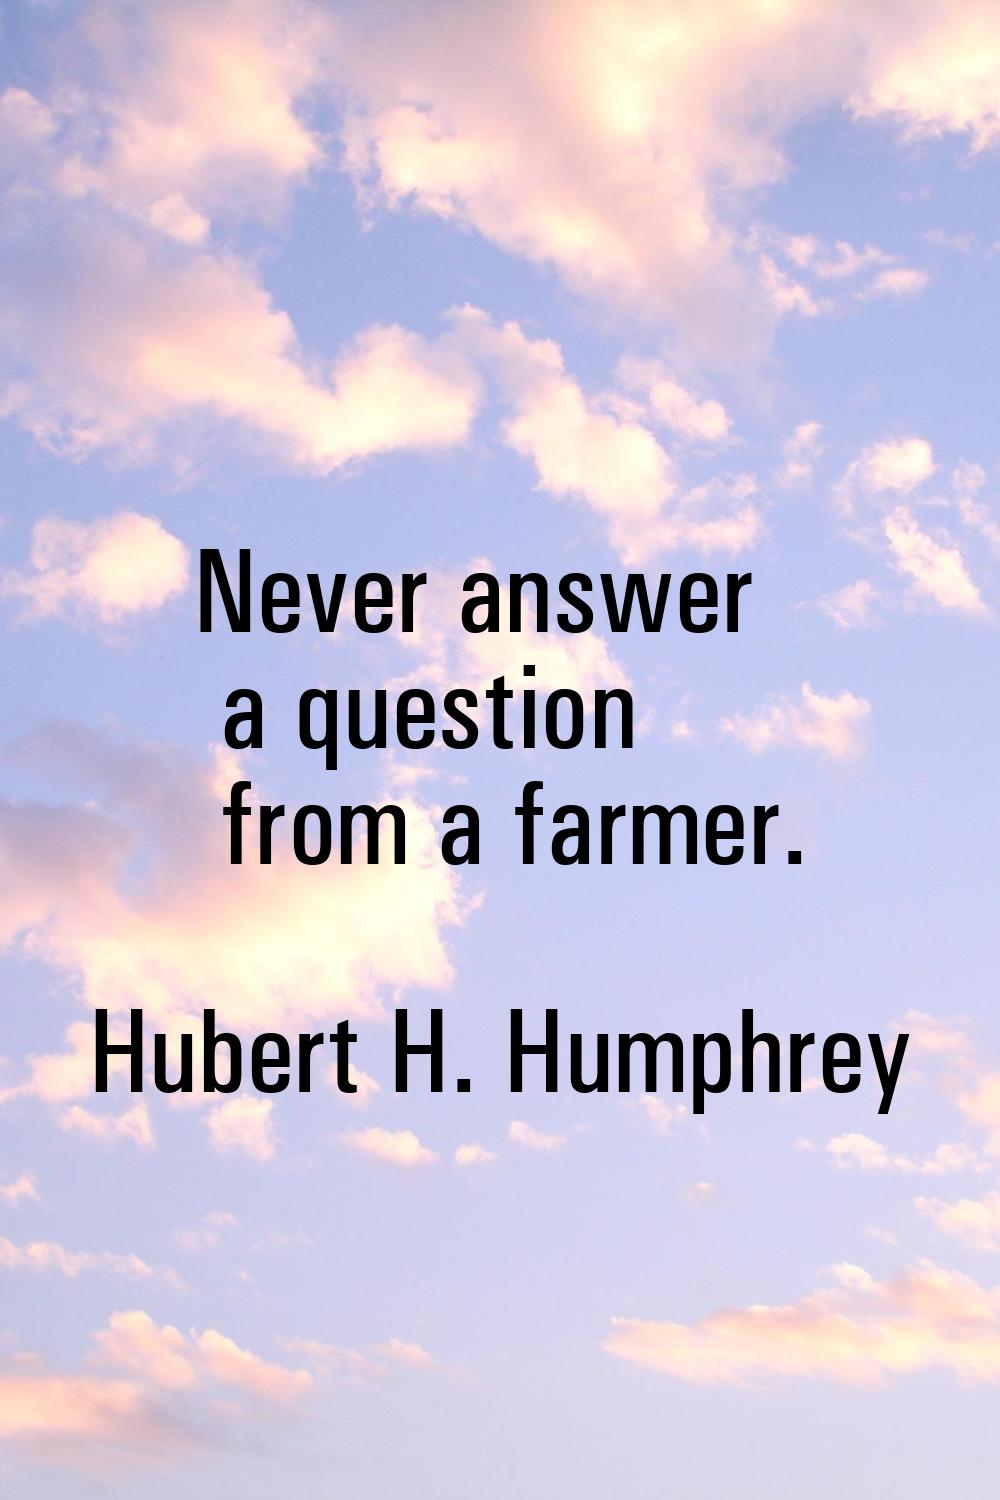 Never answer a question from a farmer.